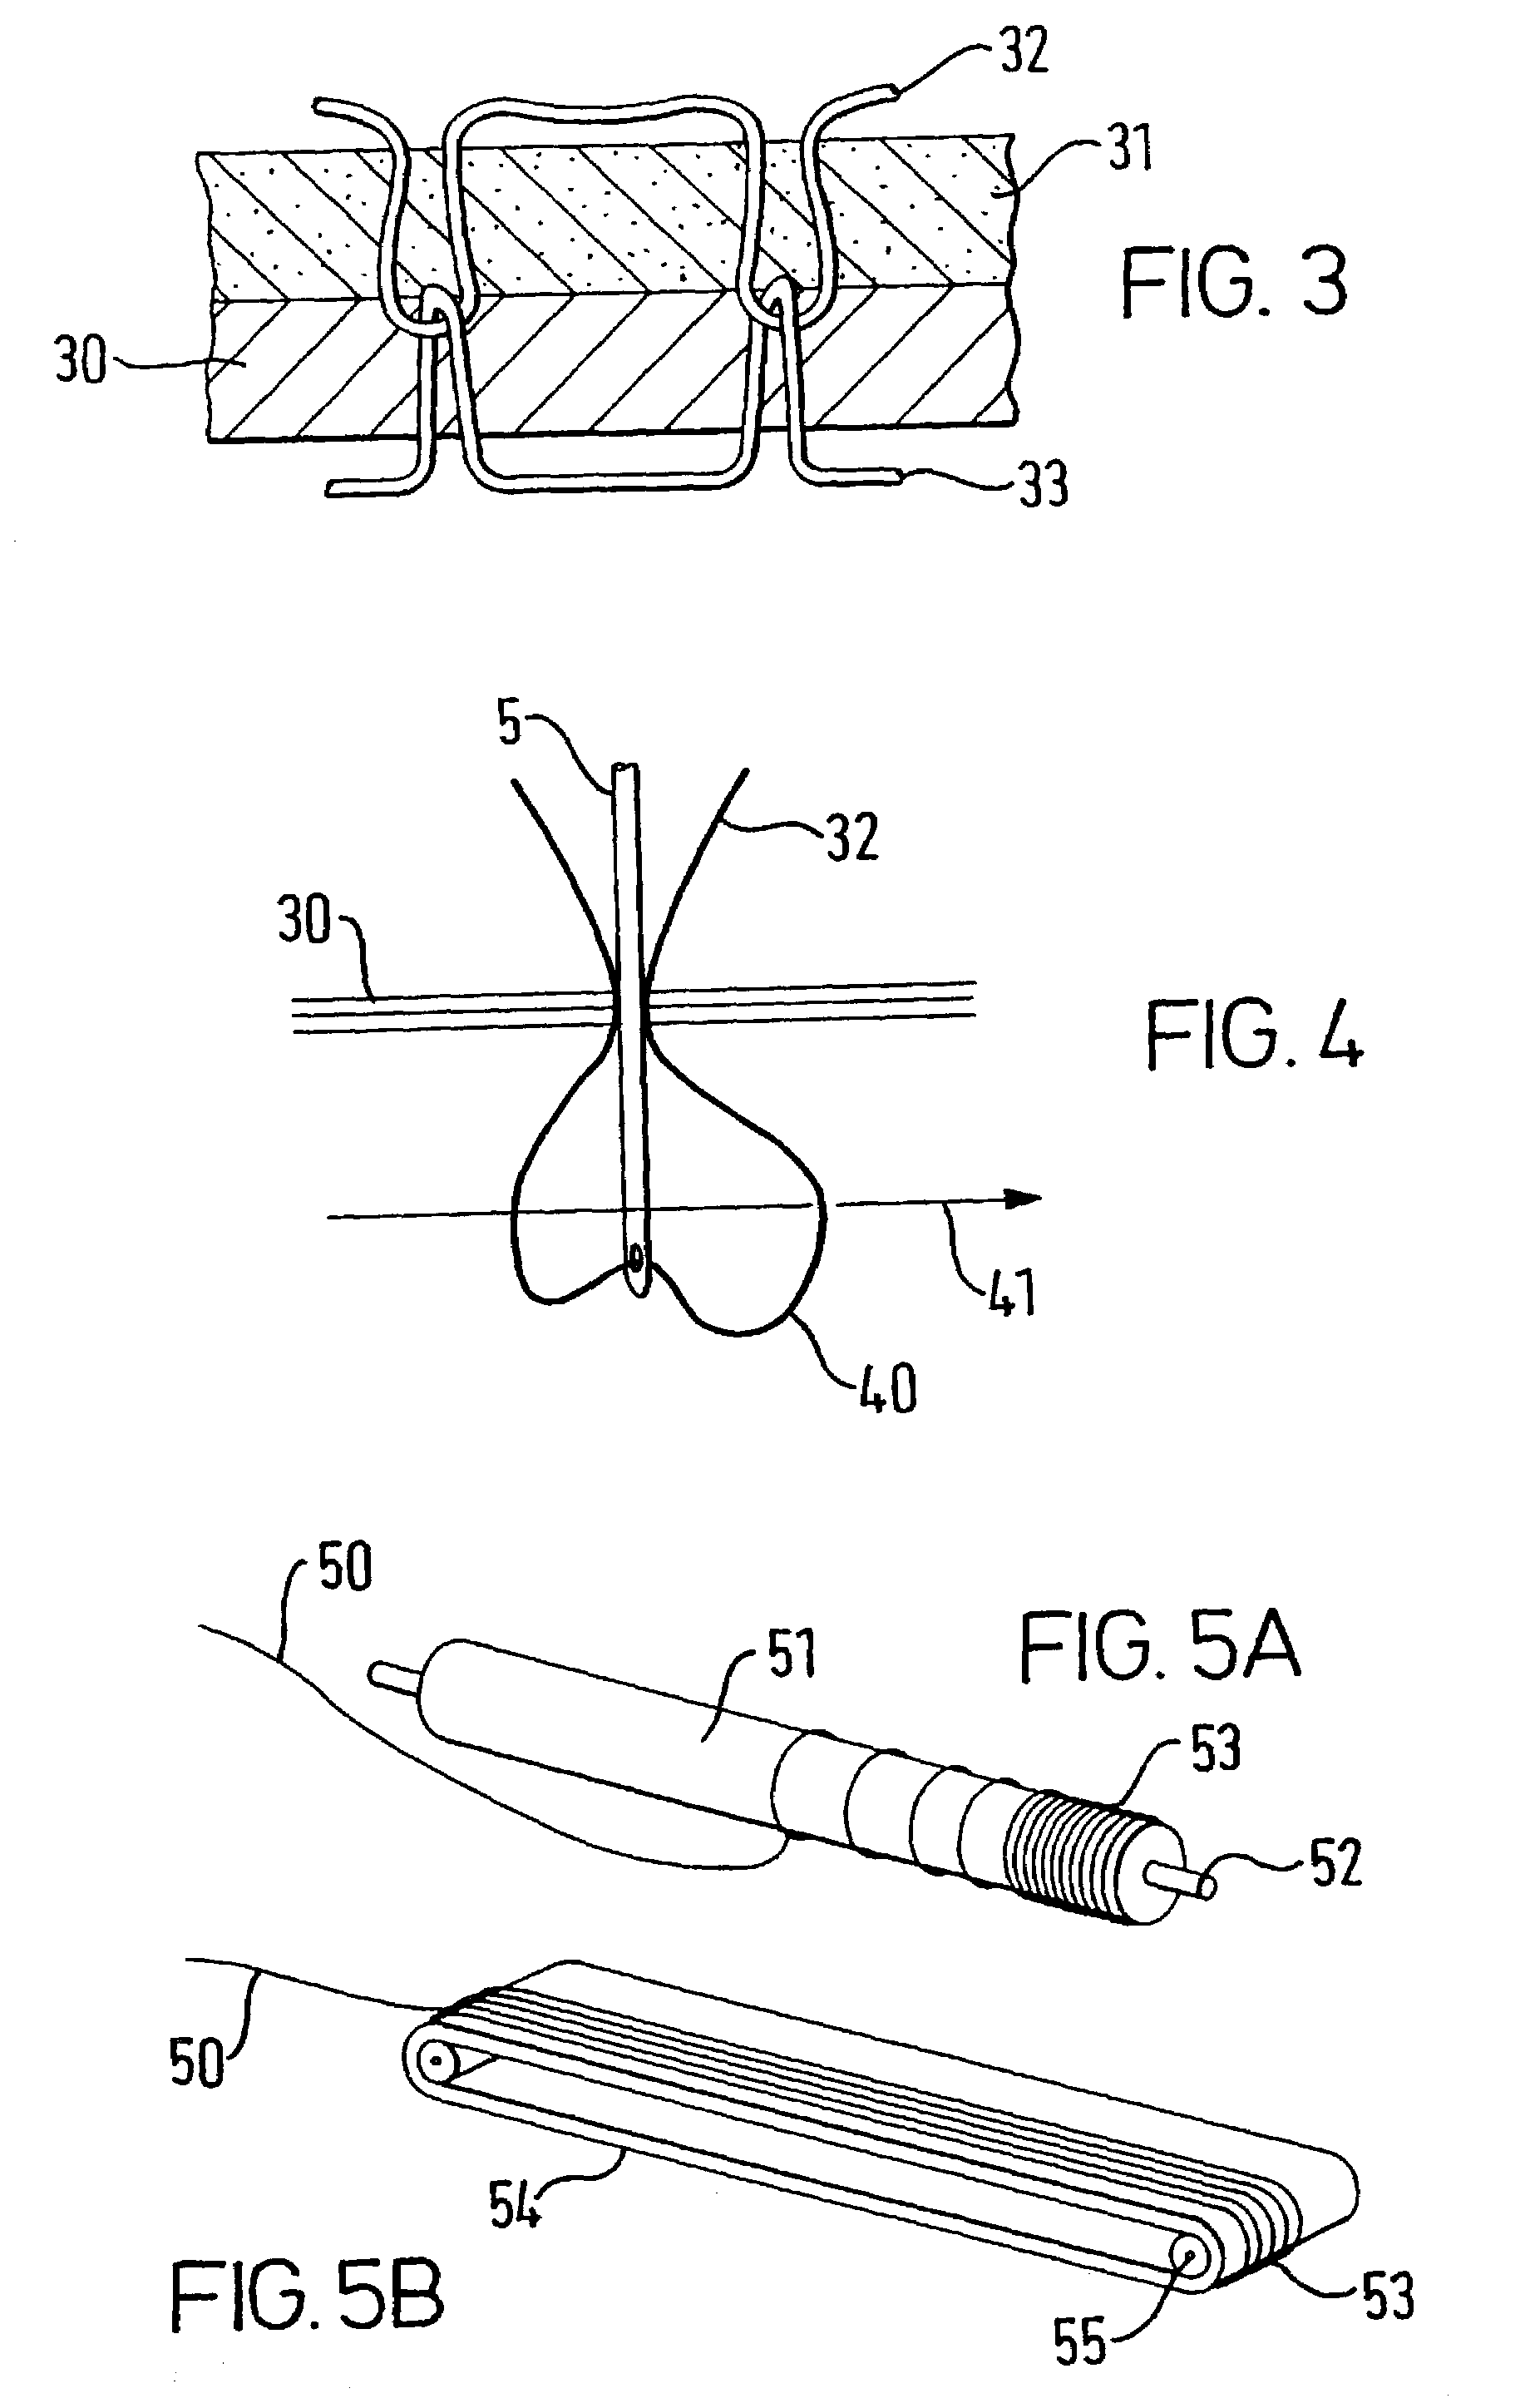 Method for manufacturing a medical implant